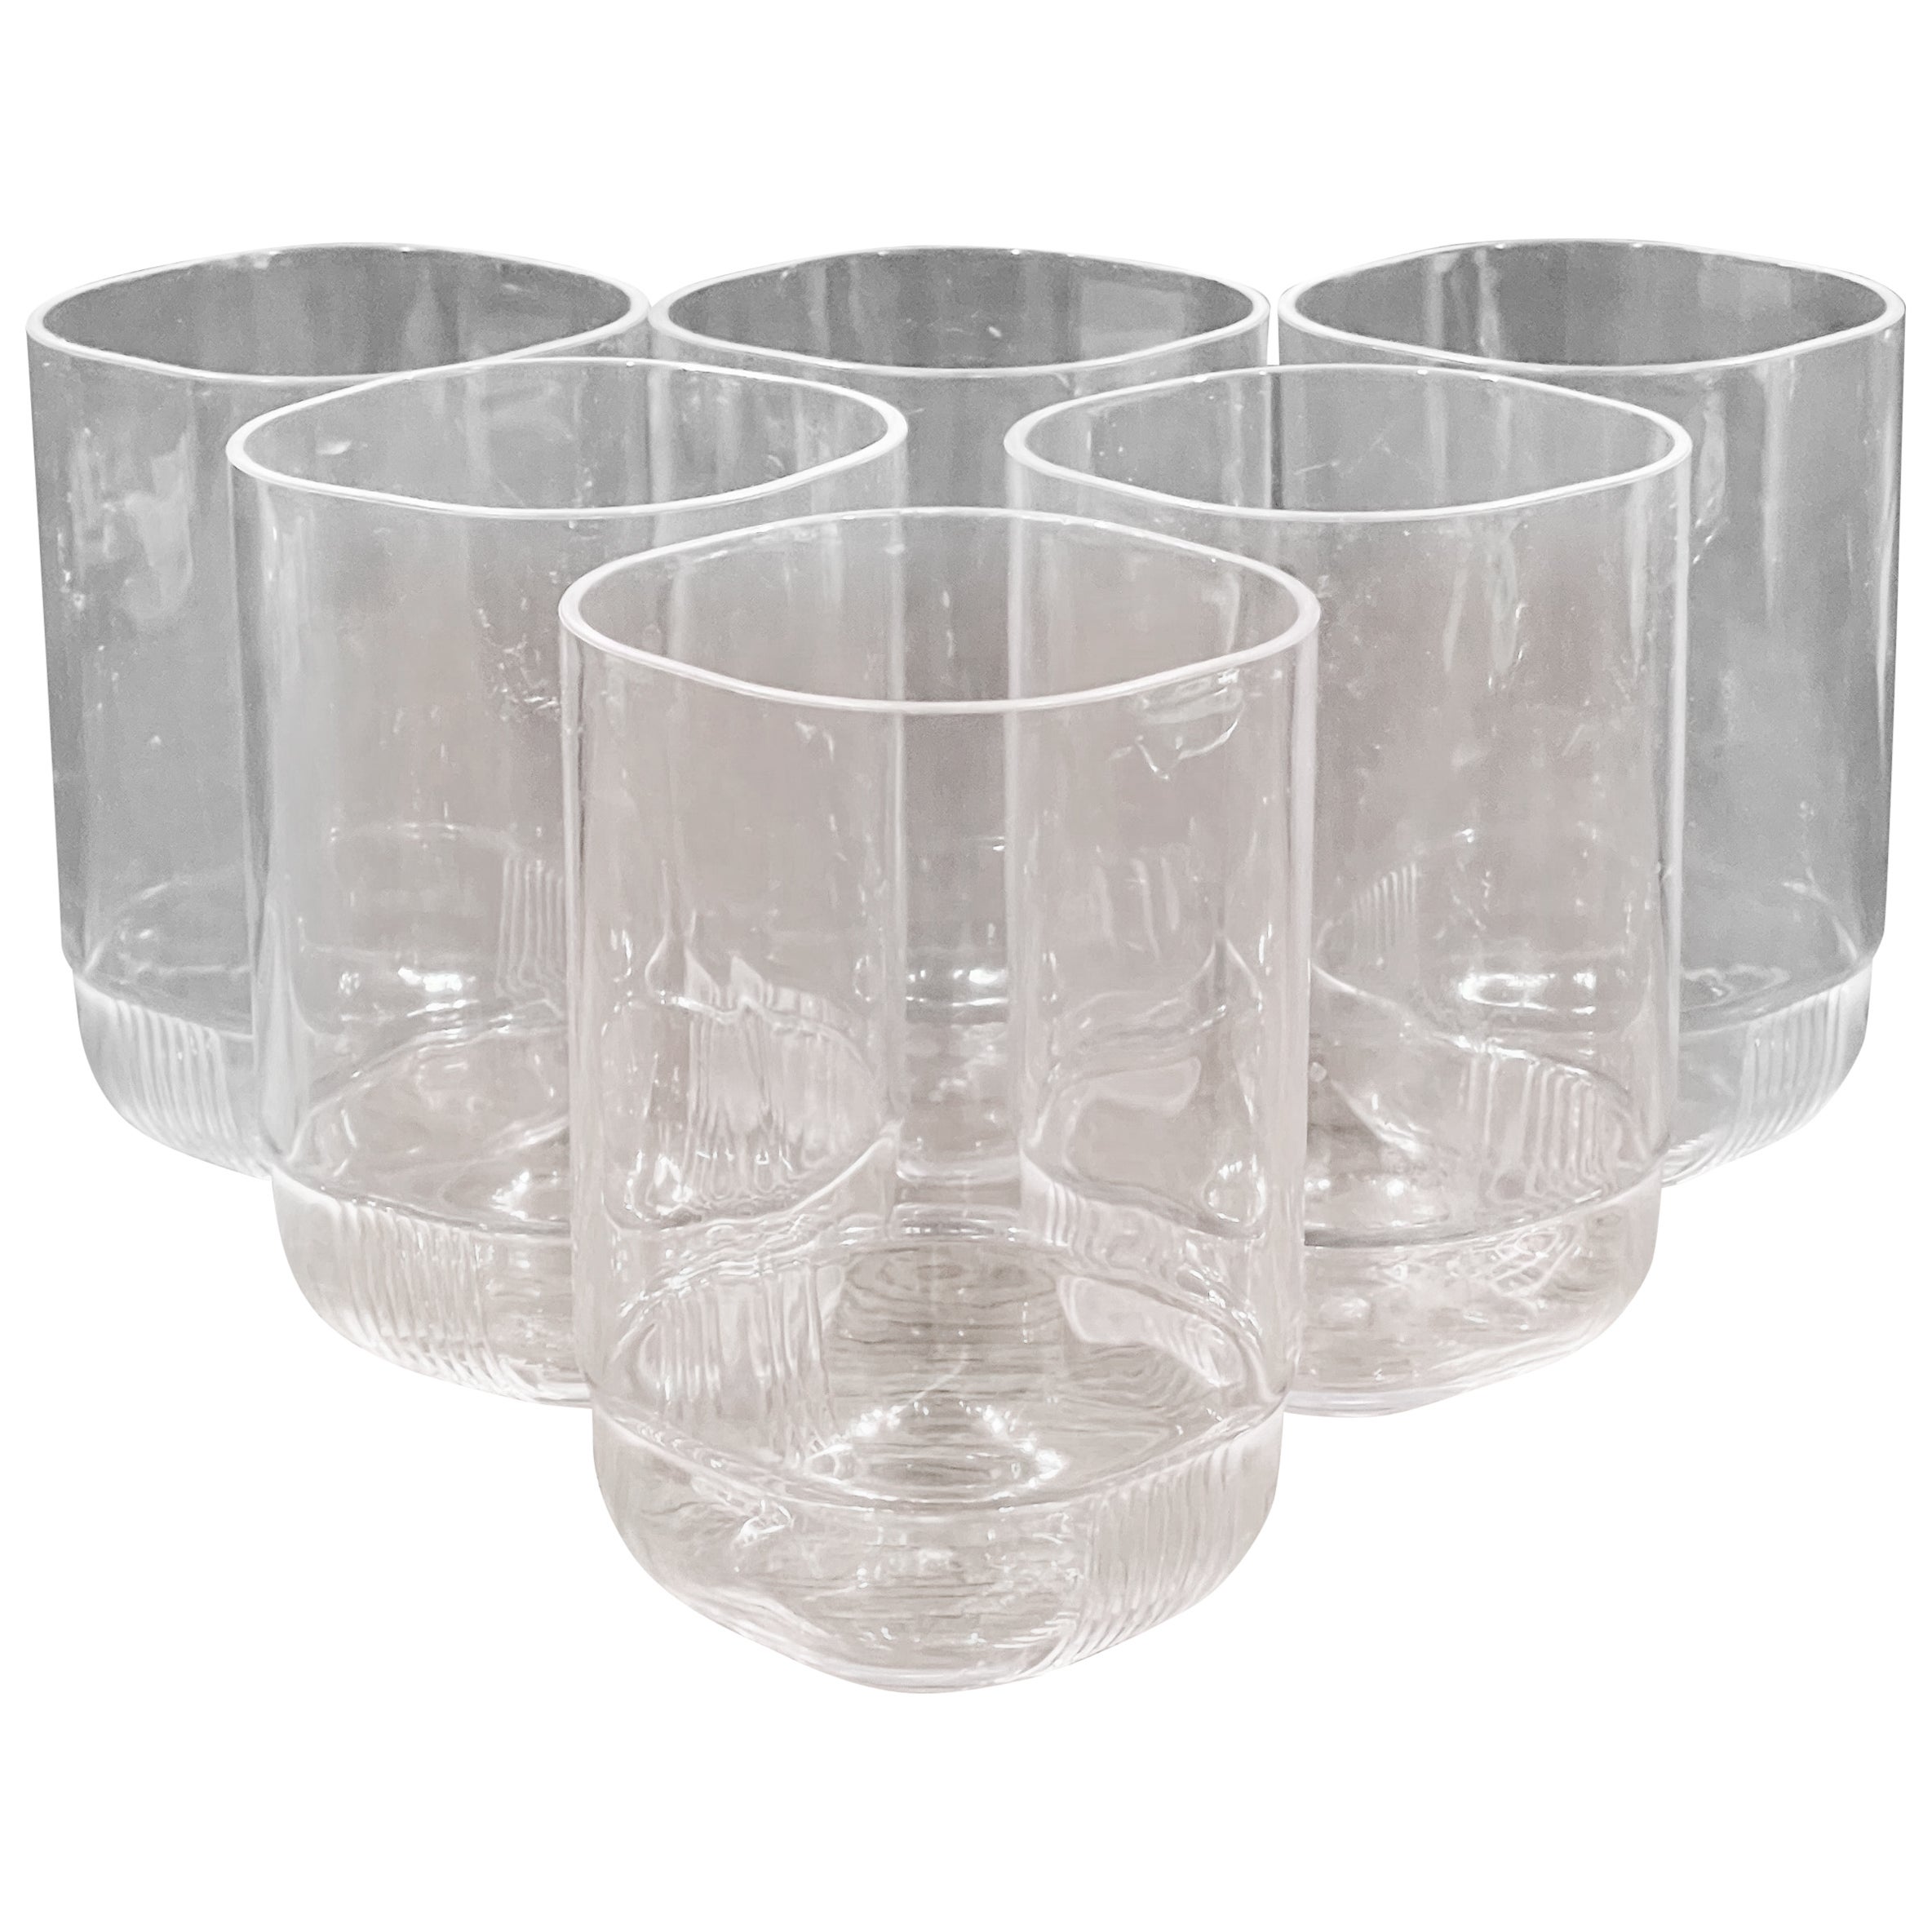 Set of Six Modern Lucite Drinking Glasses by Guzzini